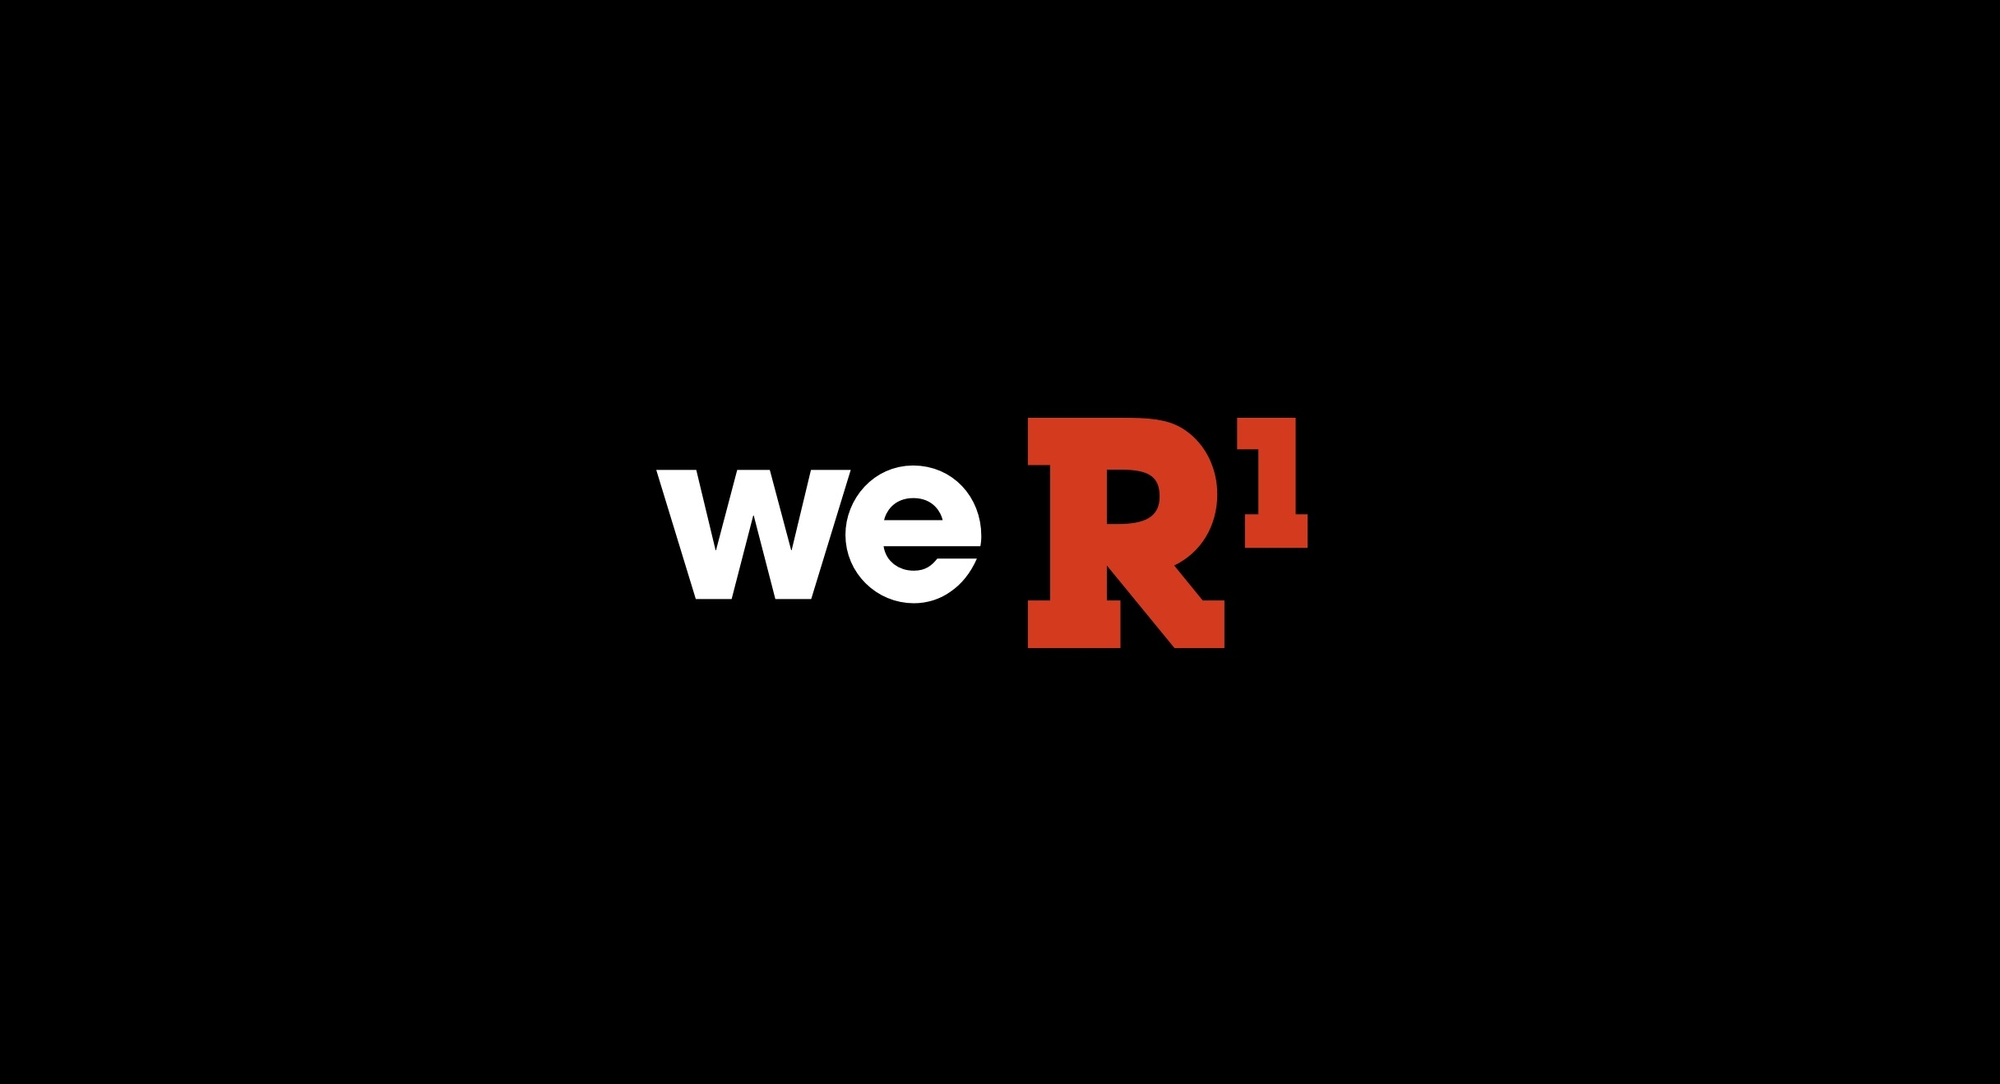 We are One graphic using the R1 logo lockup design.